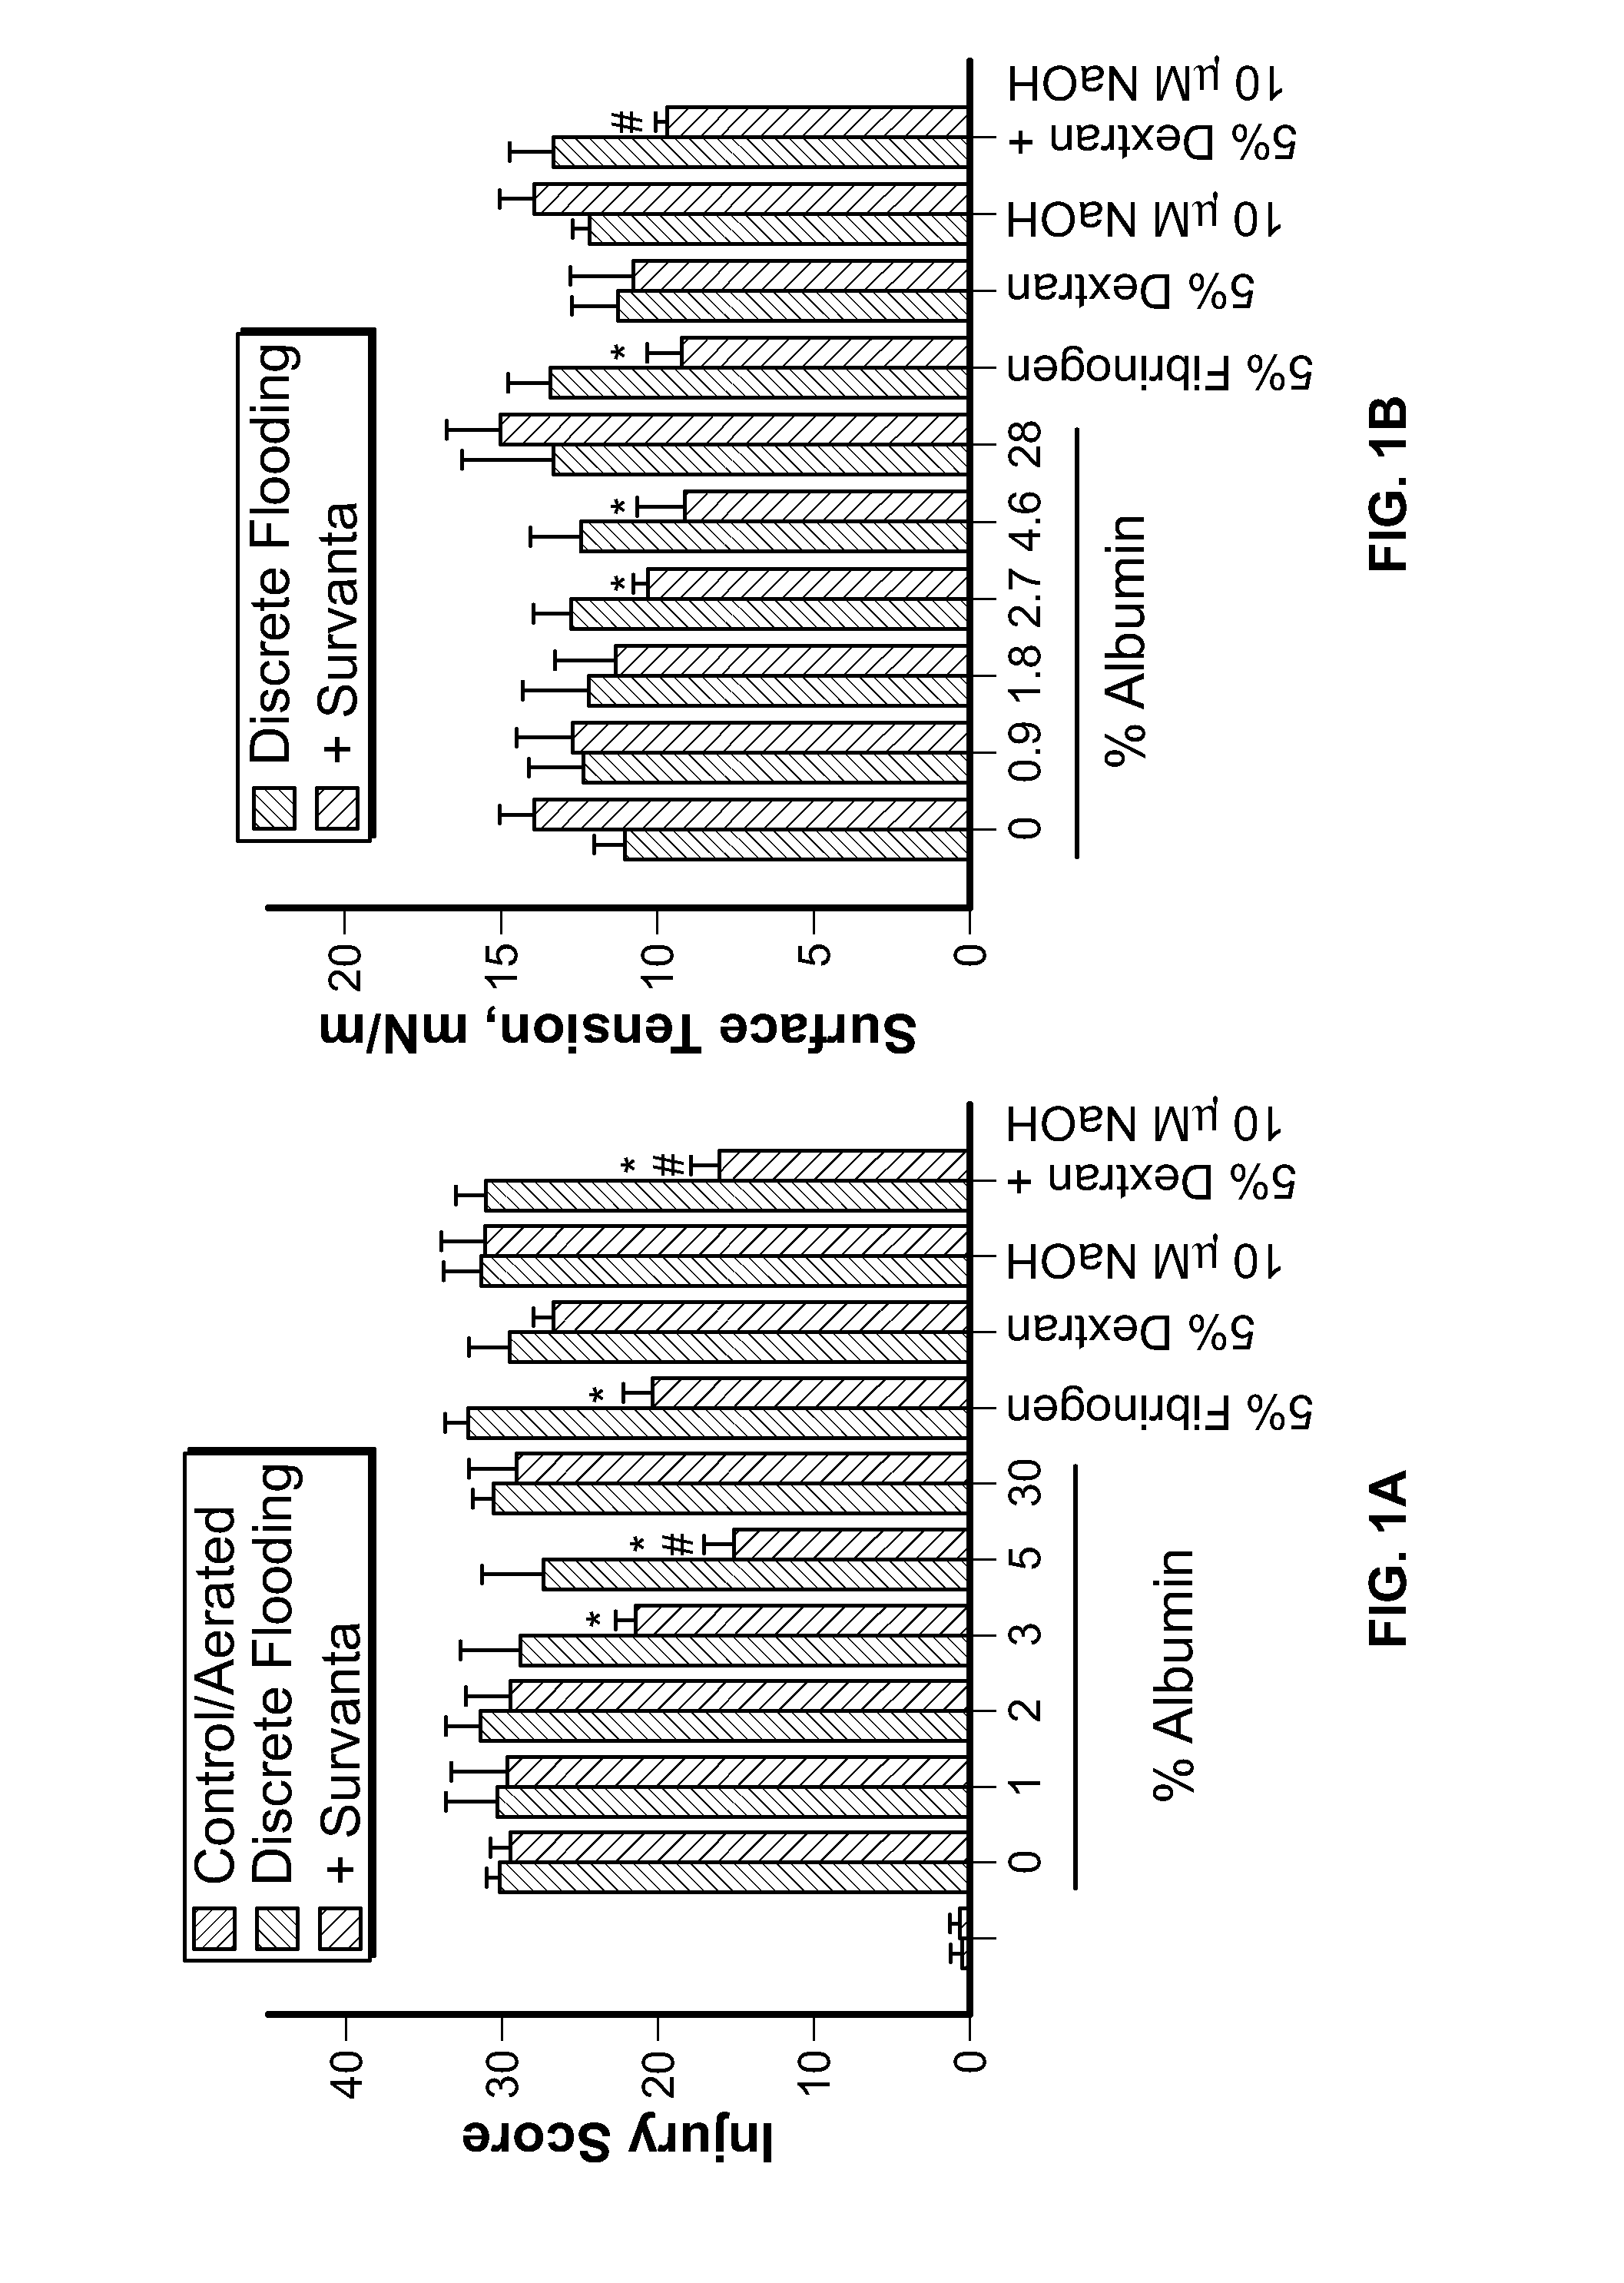 Dilute surfactant or isolated surfactant protein solution for the reduction of surface tension in the lung